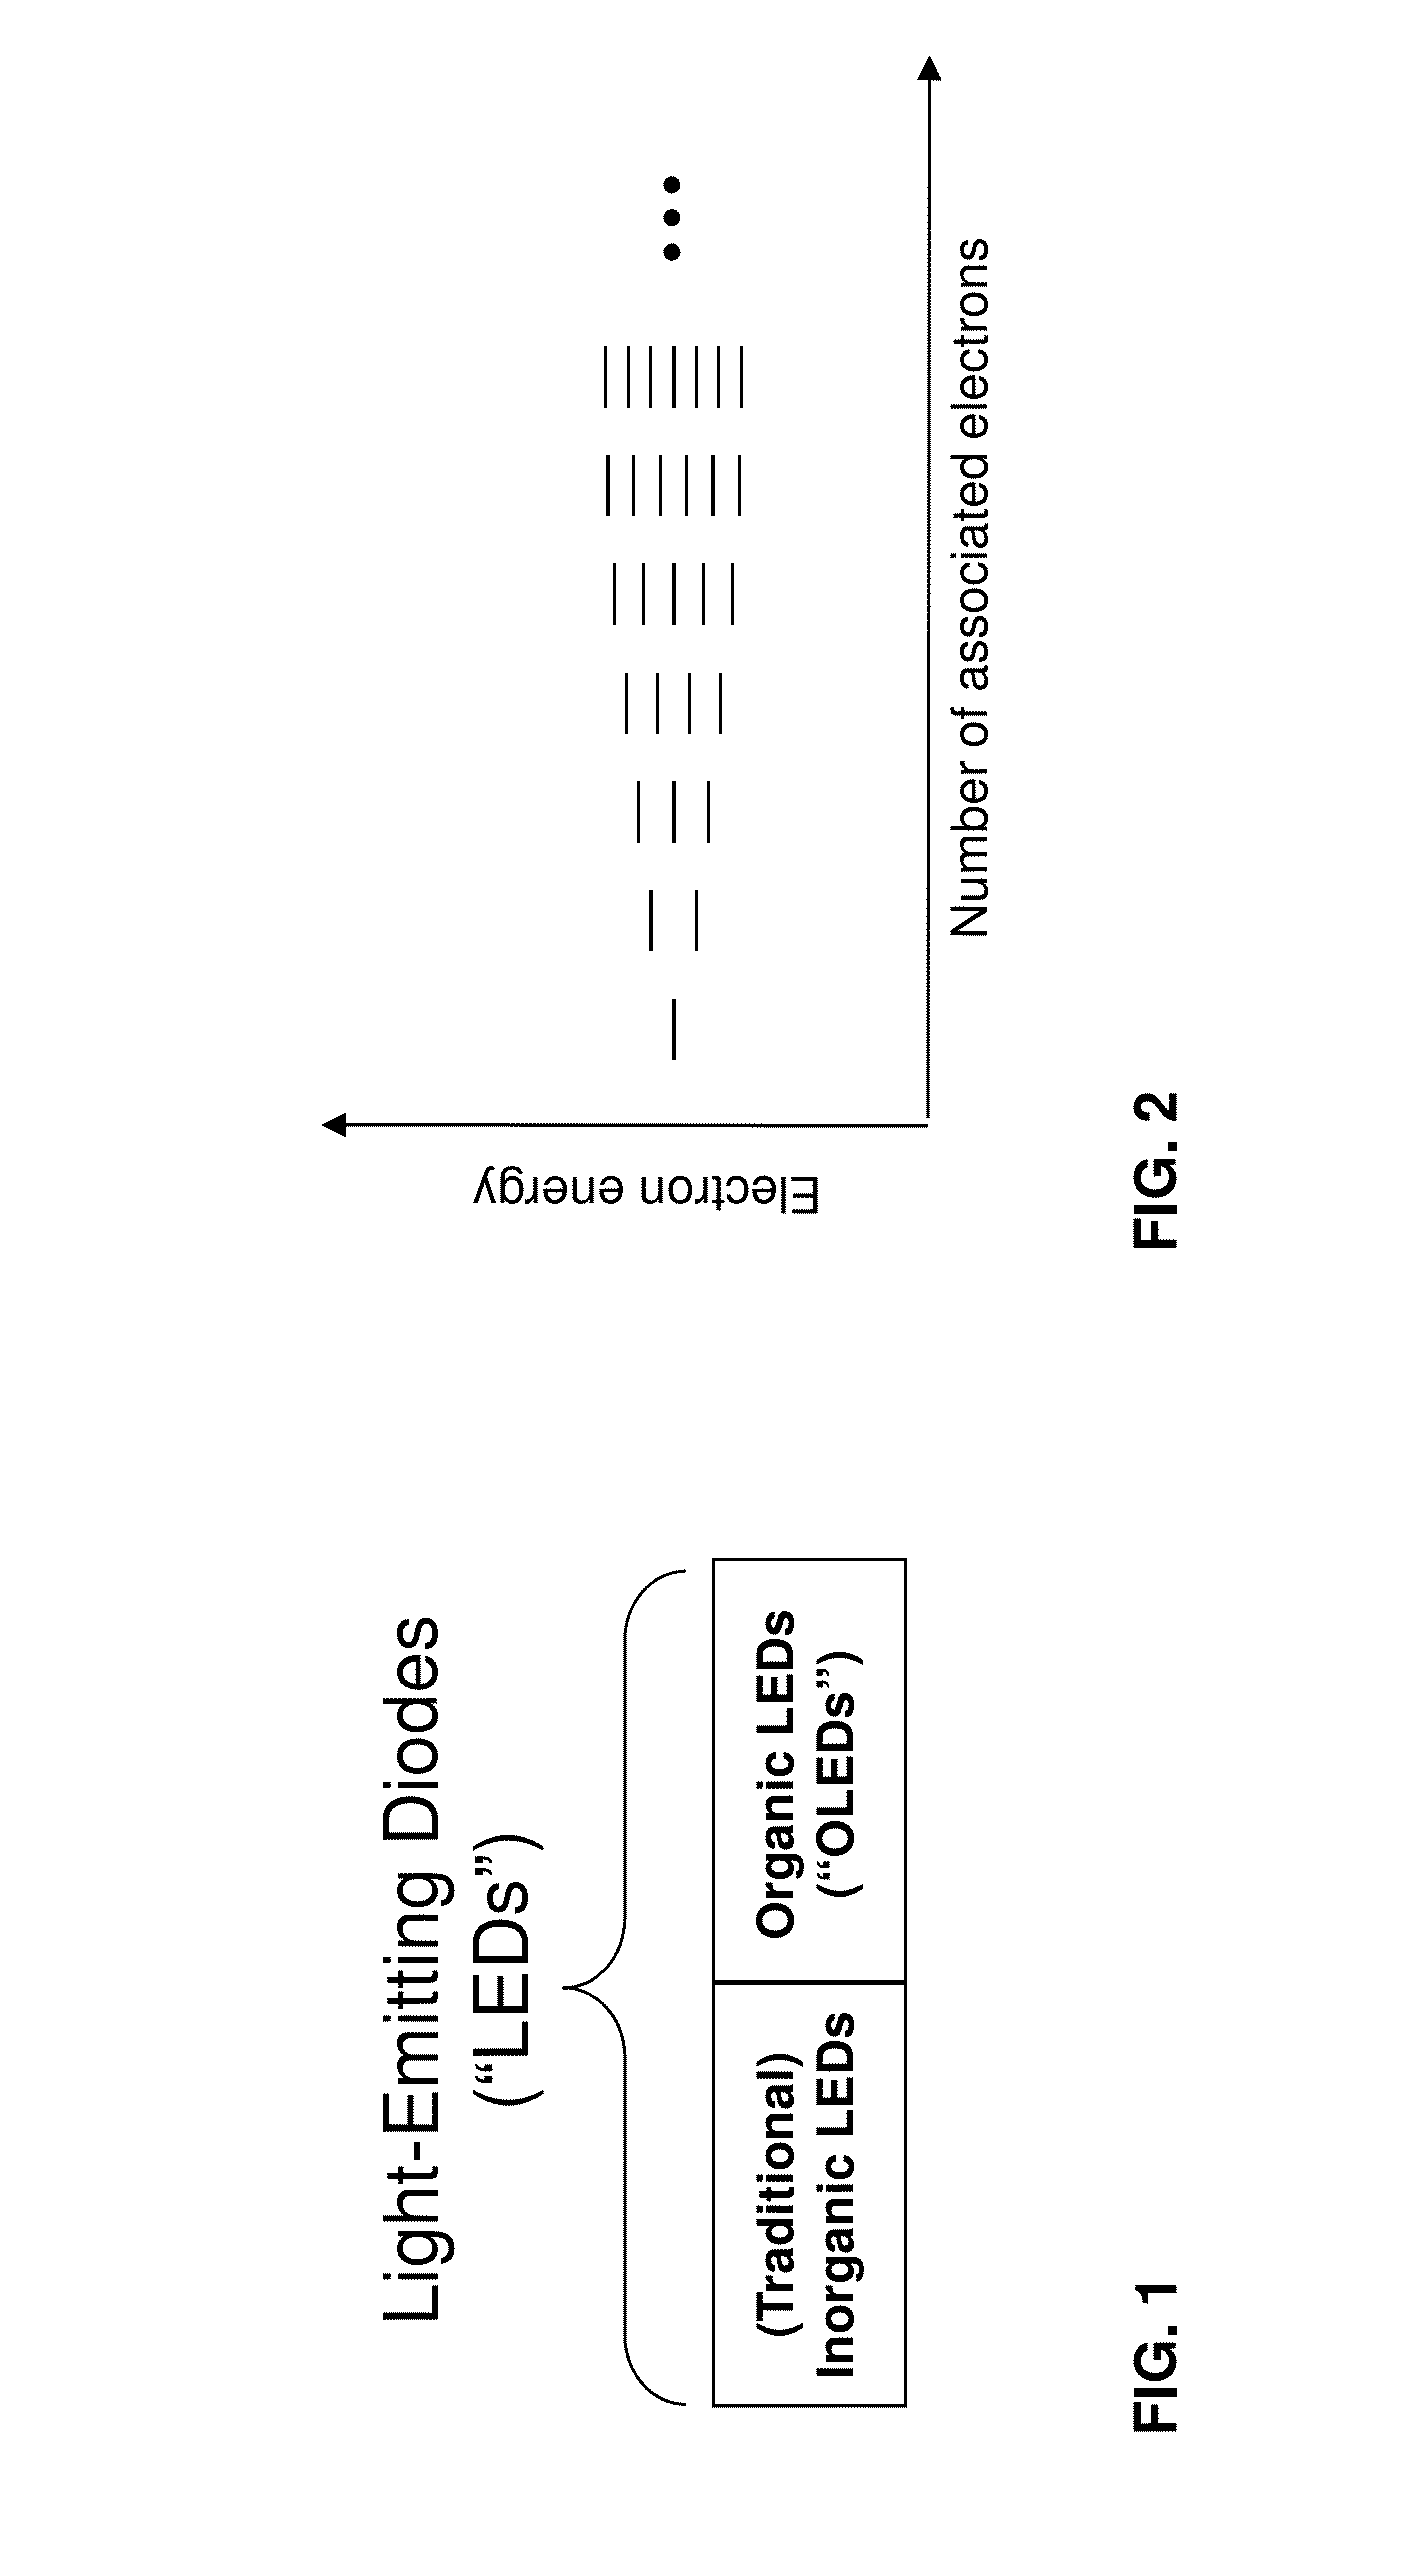 Use of LED or OLED Array to Implement Integrated Combinations of Touch Screen Tactile, Touch Gesture Sensor, Color Image Display, Hand-Image Gesture Sensor, Document Scanner, Secure Optical Data Exchange, and Fingerprint Processing Capabilities